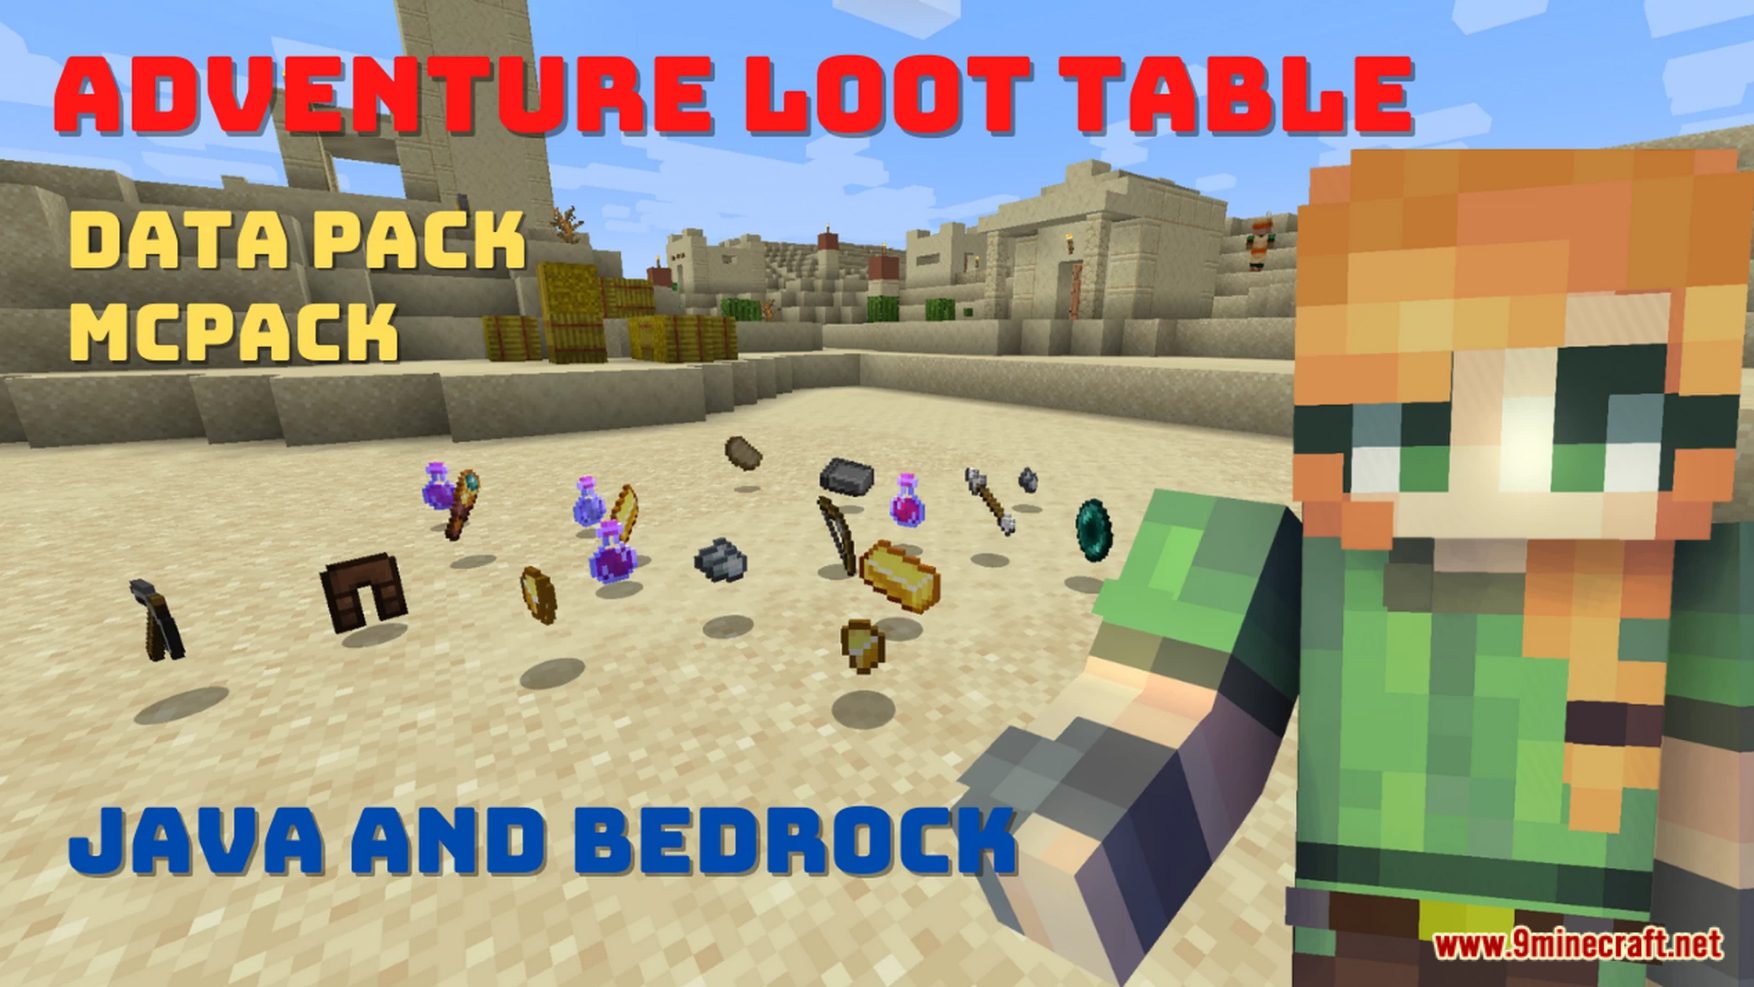 Traveler's Loots Data Pack (1.19.4, 1.19.2) - Easier Loots! 2